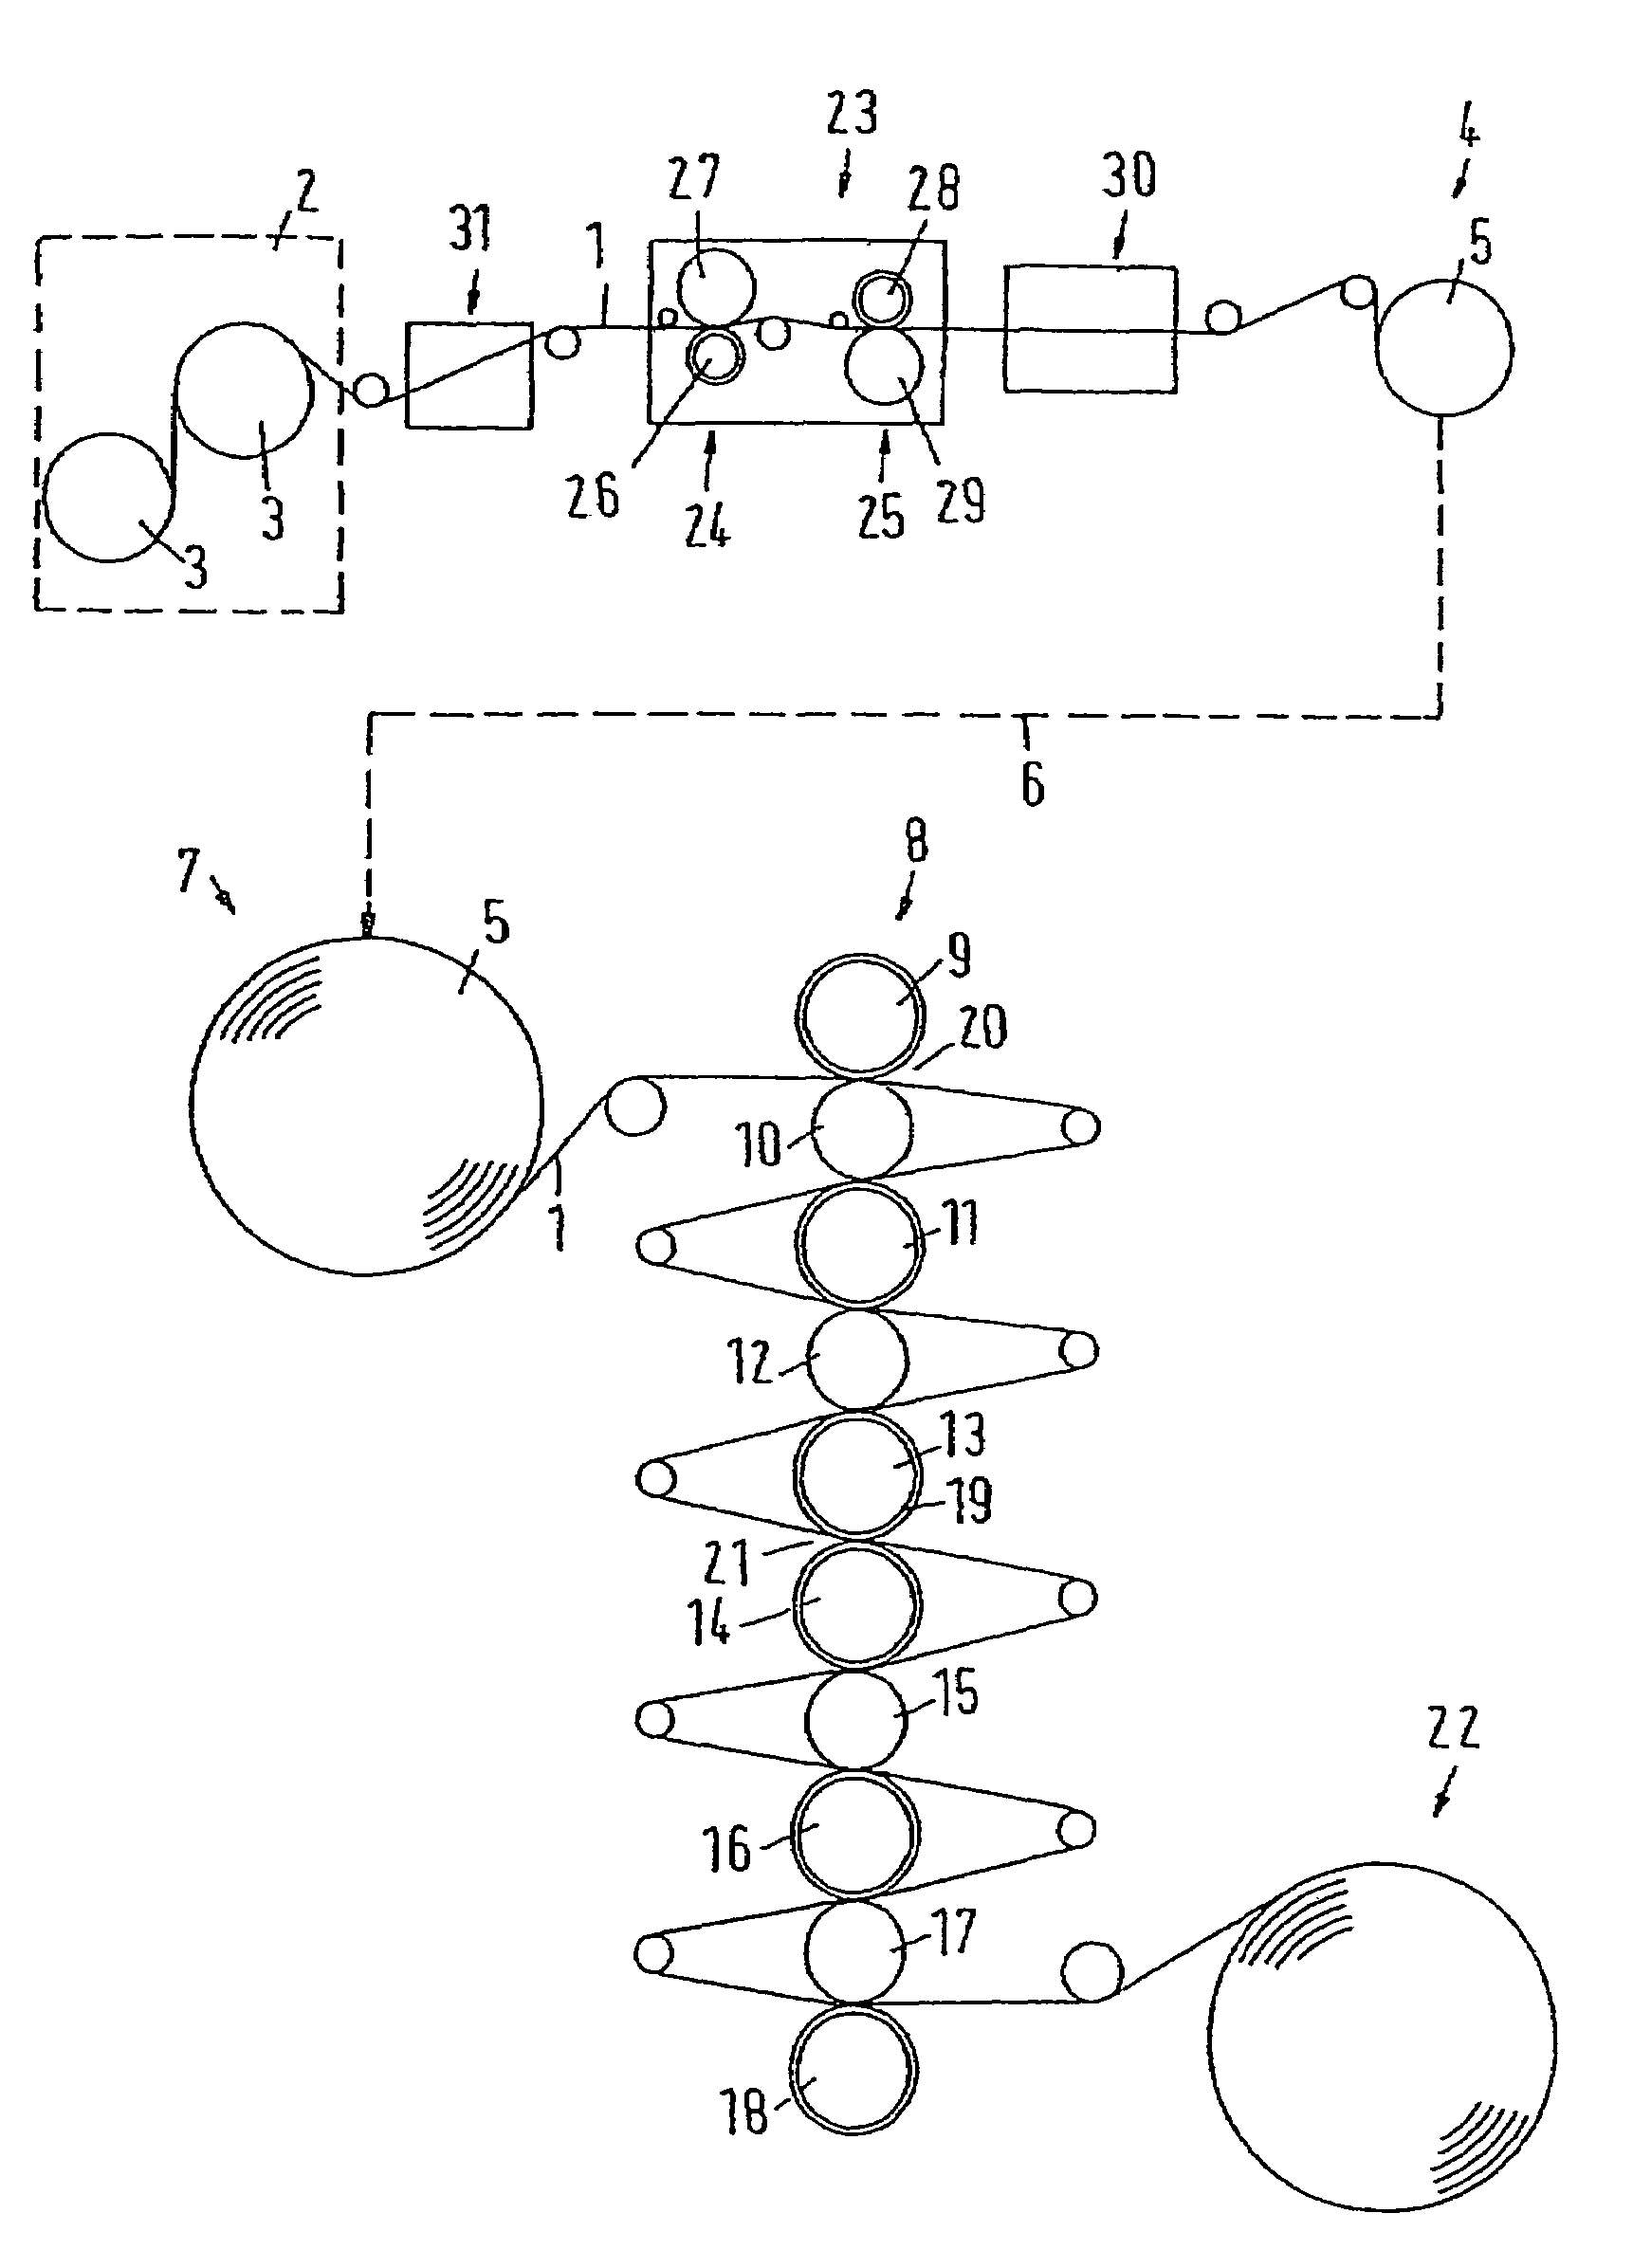 Method and device for calendering a paper web